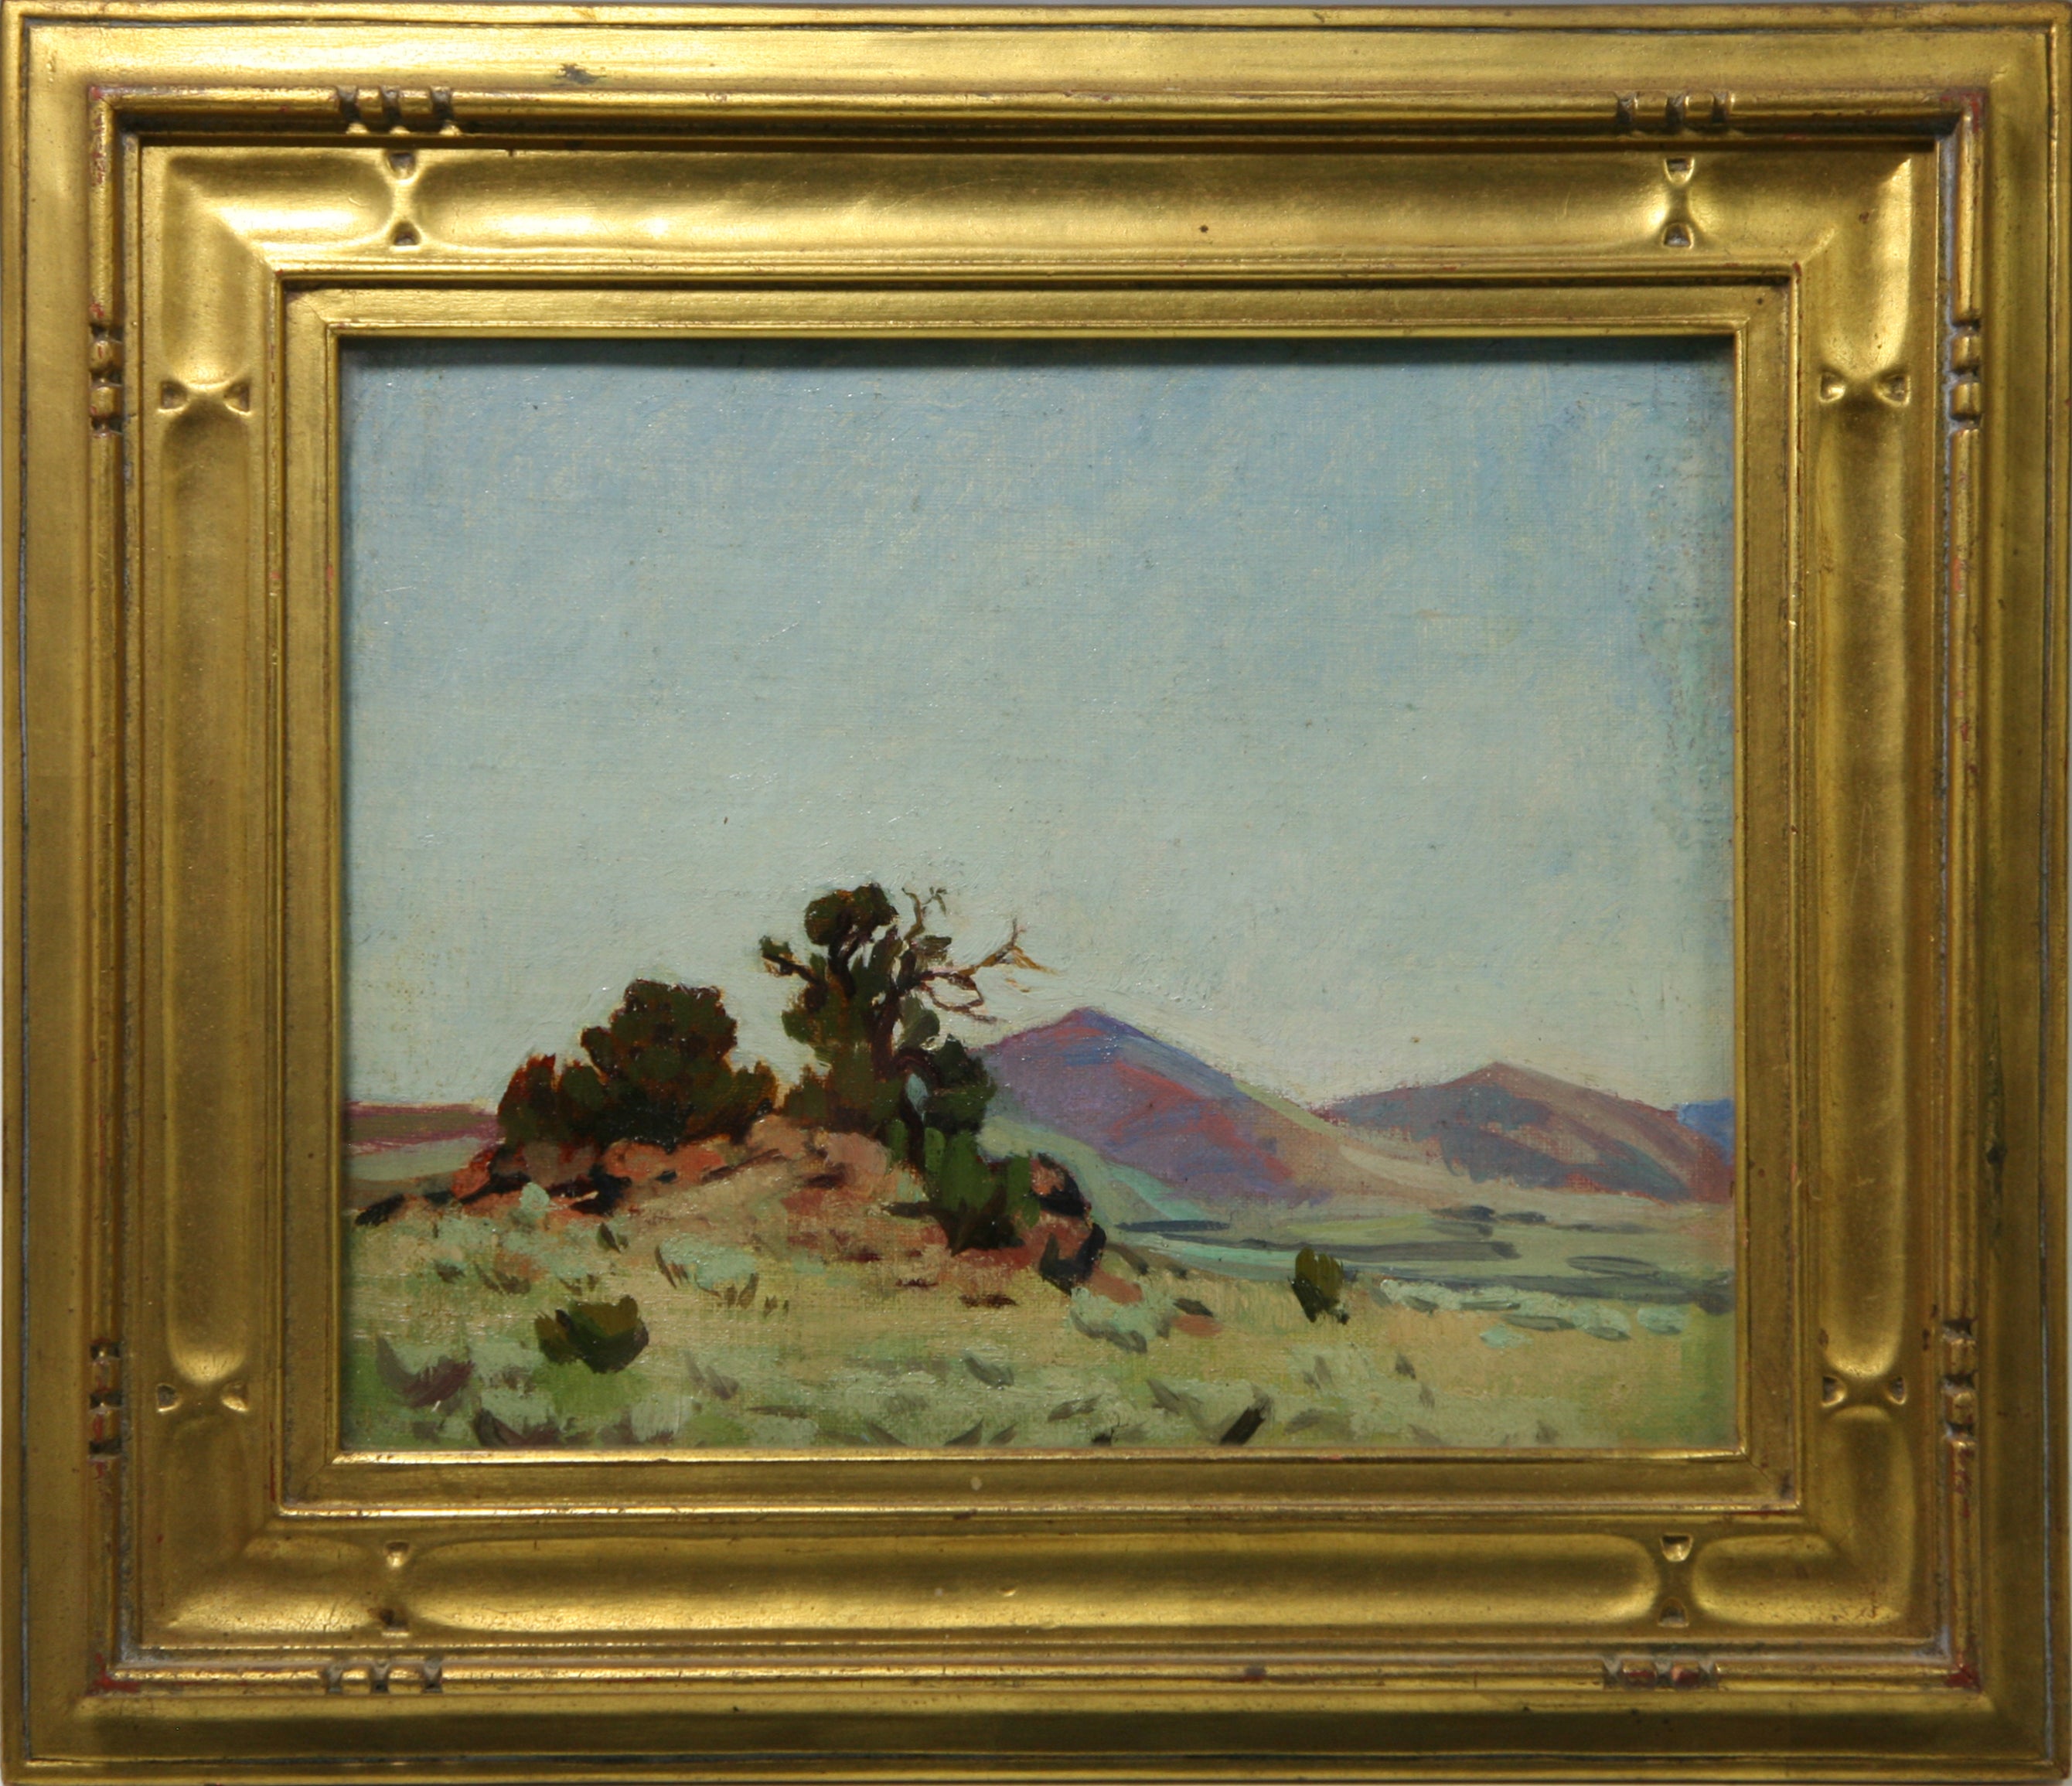 SOLD Mary-Russell Ferrell Colton (1889-1971) - Ancient Hills